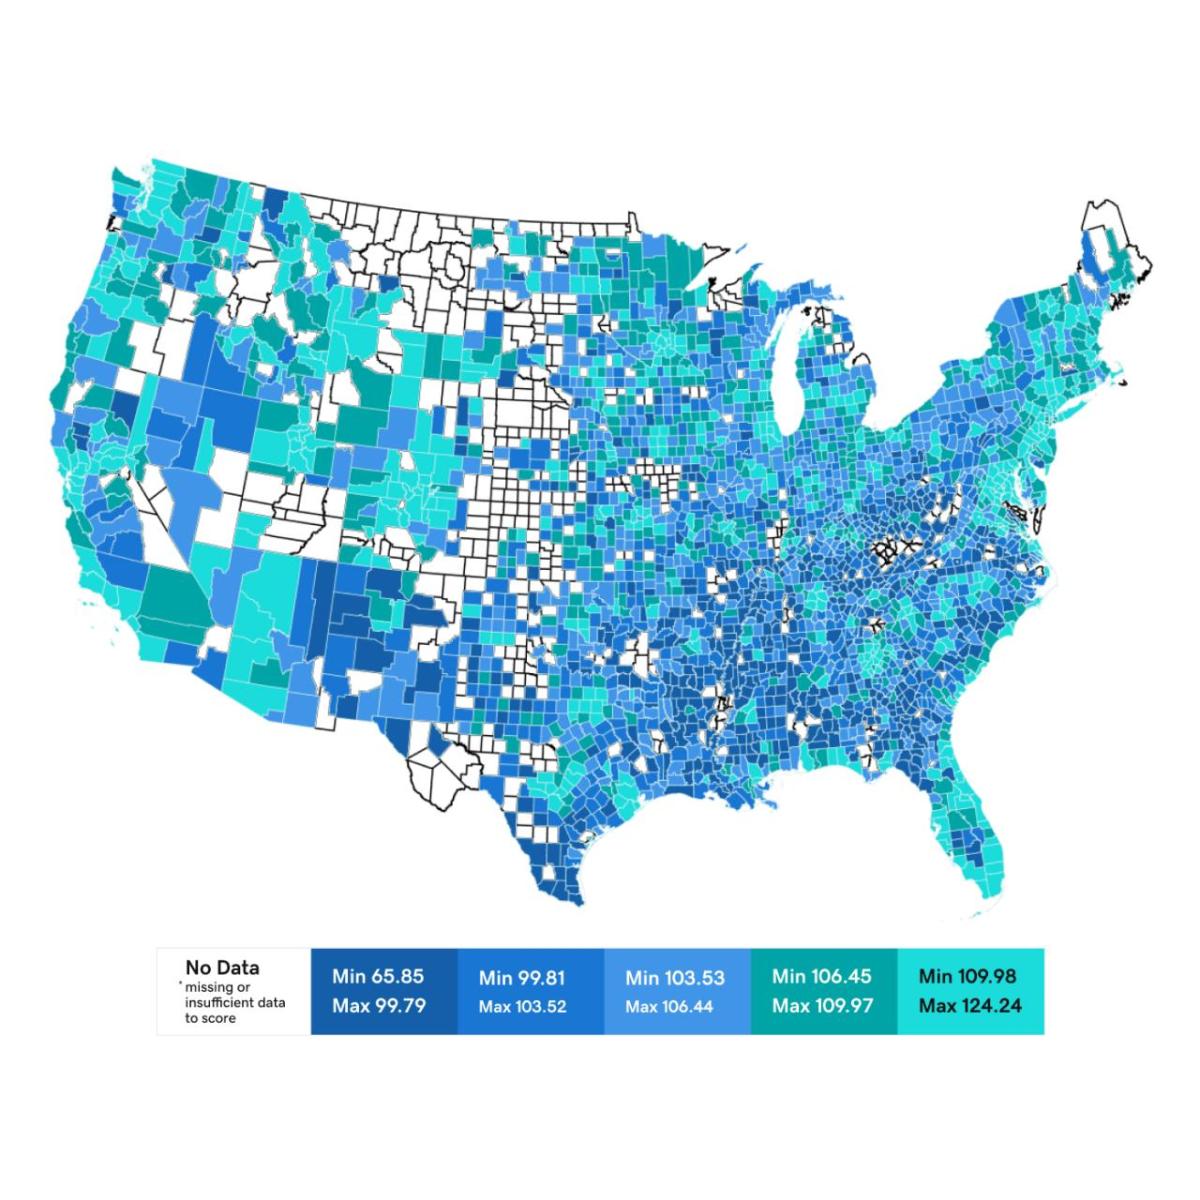 Microbusiness report map of the United States